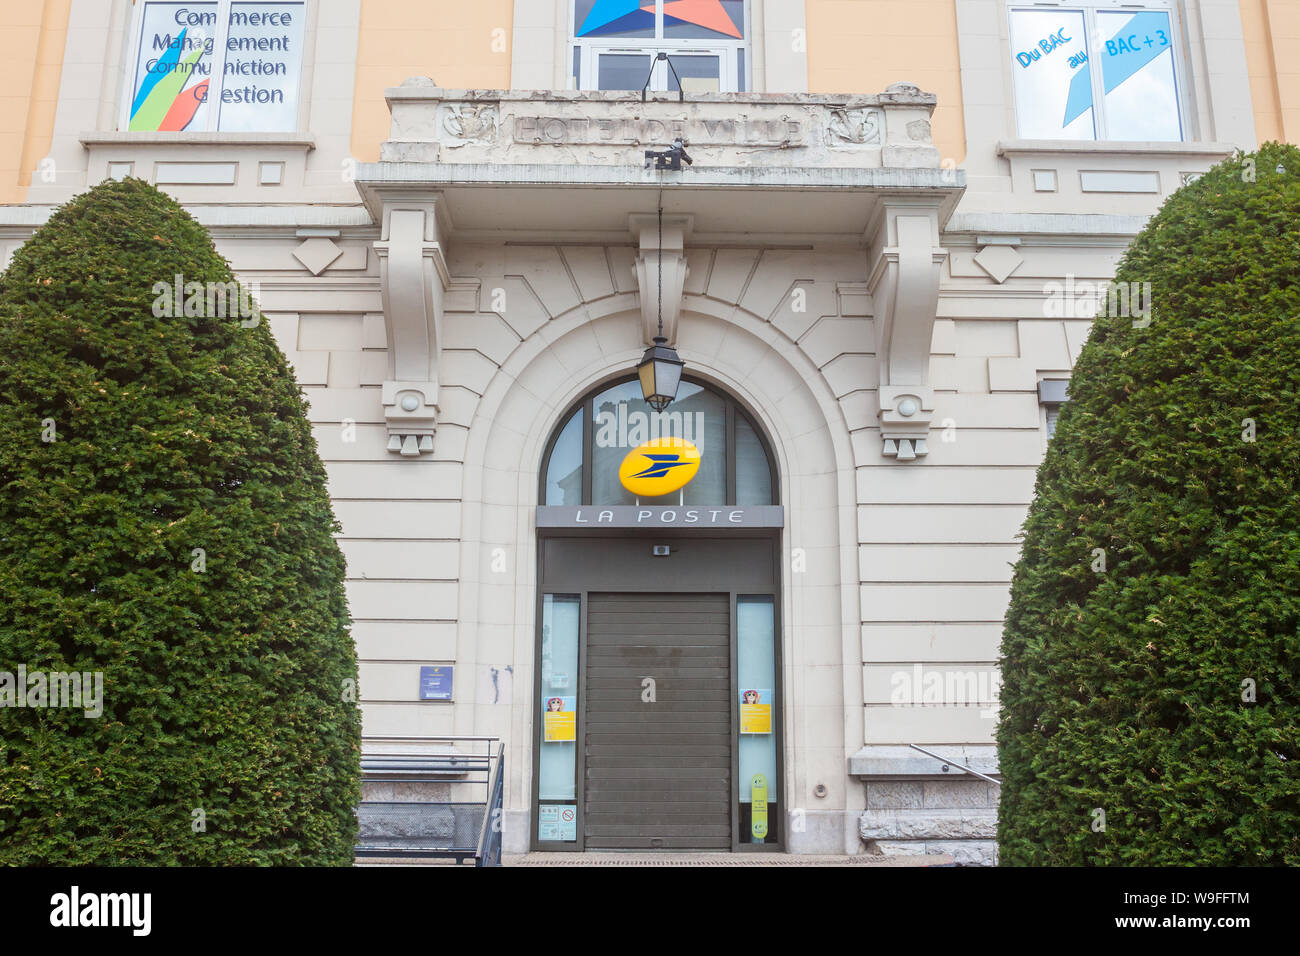 VILLEURBANNE, FRANCE - JULY 15, 2019: Logo of La Poste on their local post office for Villeurbanne. Groupe La Poste is the public postal service of Fr Stock Photo